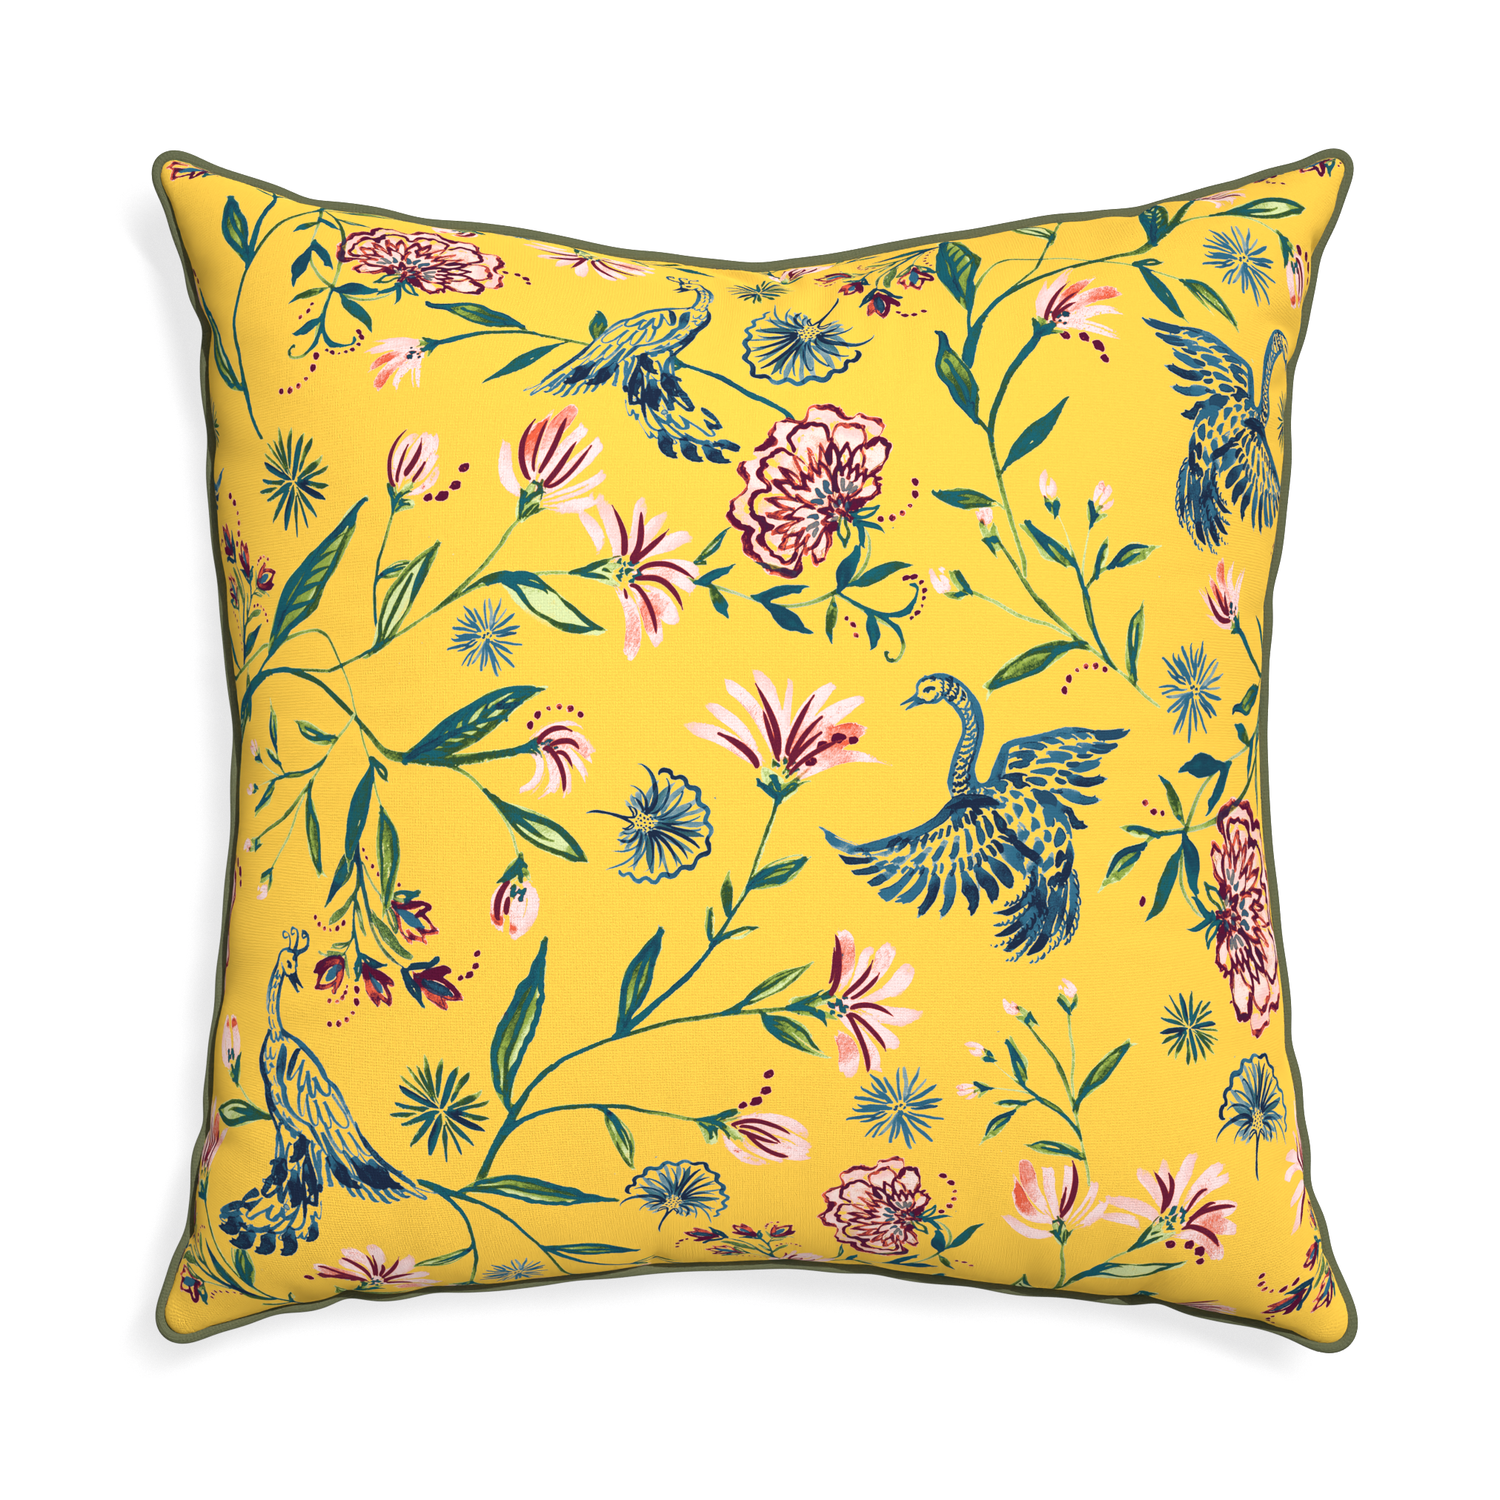 Euro-sham daphne canary custom pillow with f piping on white background